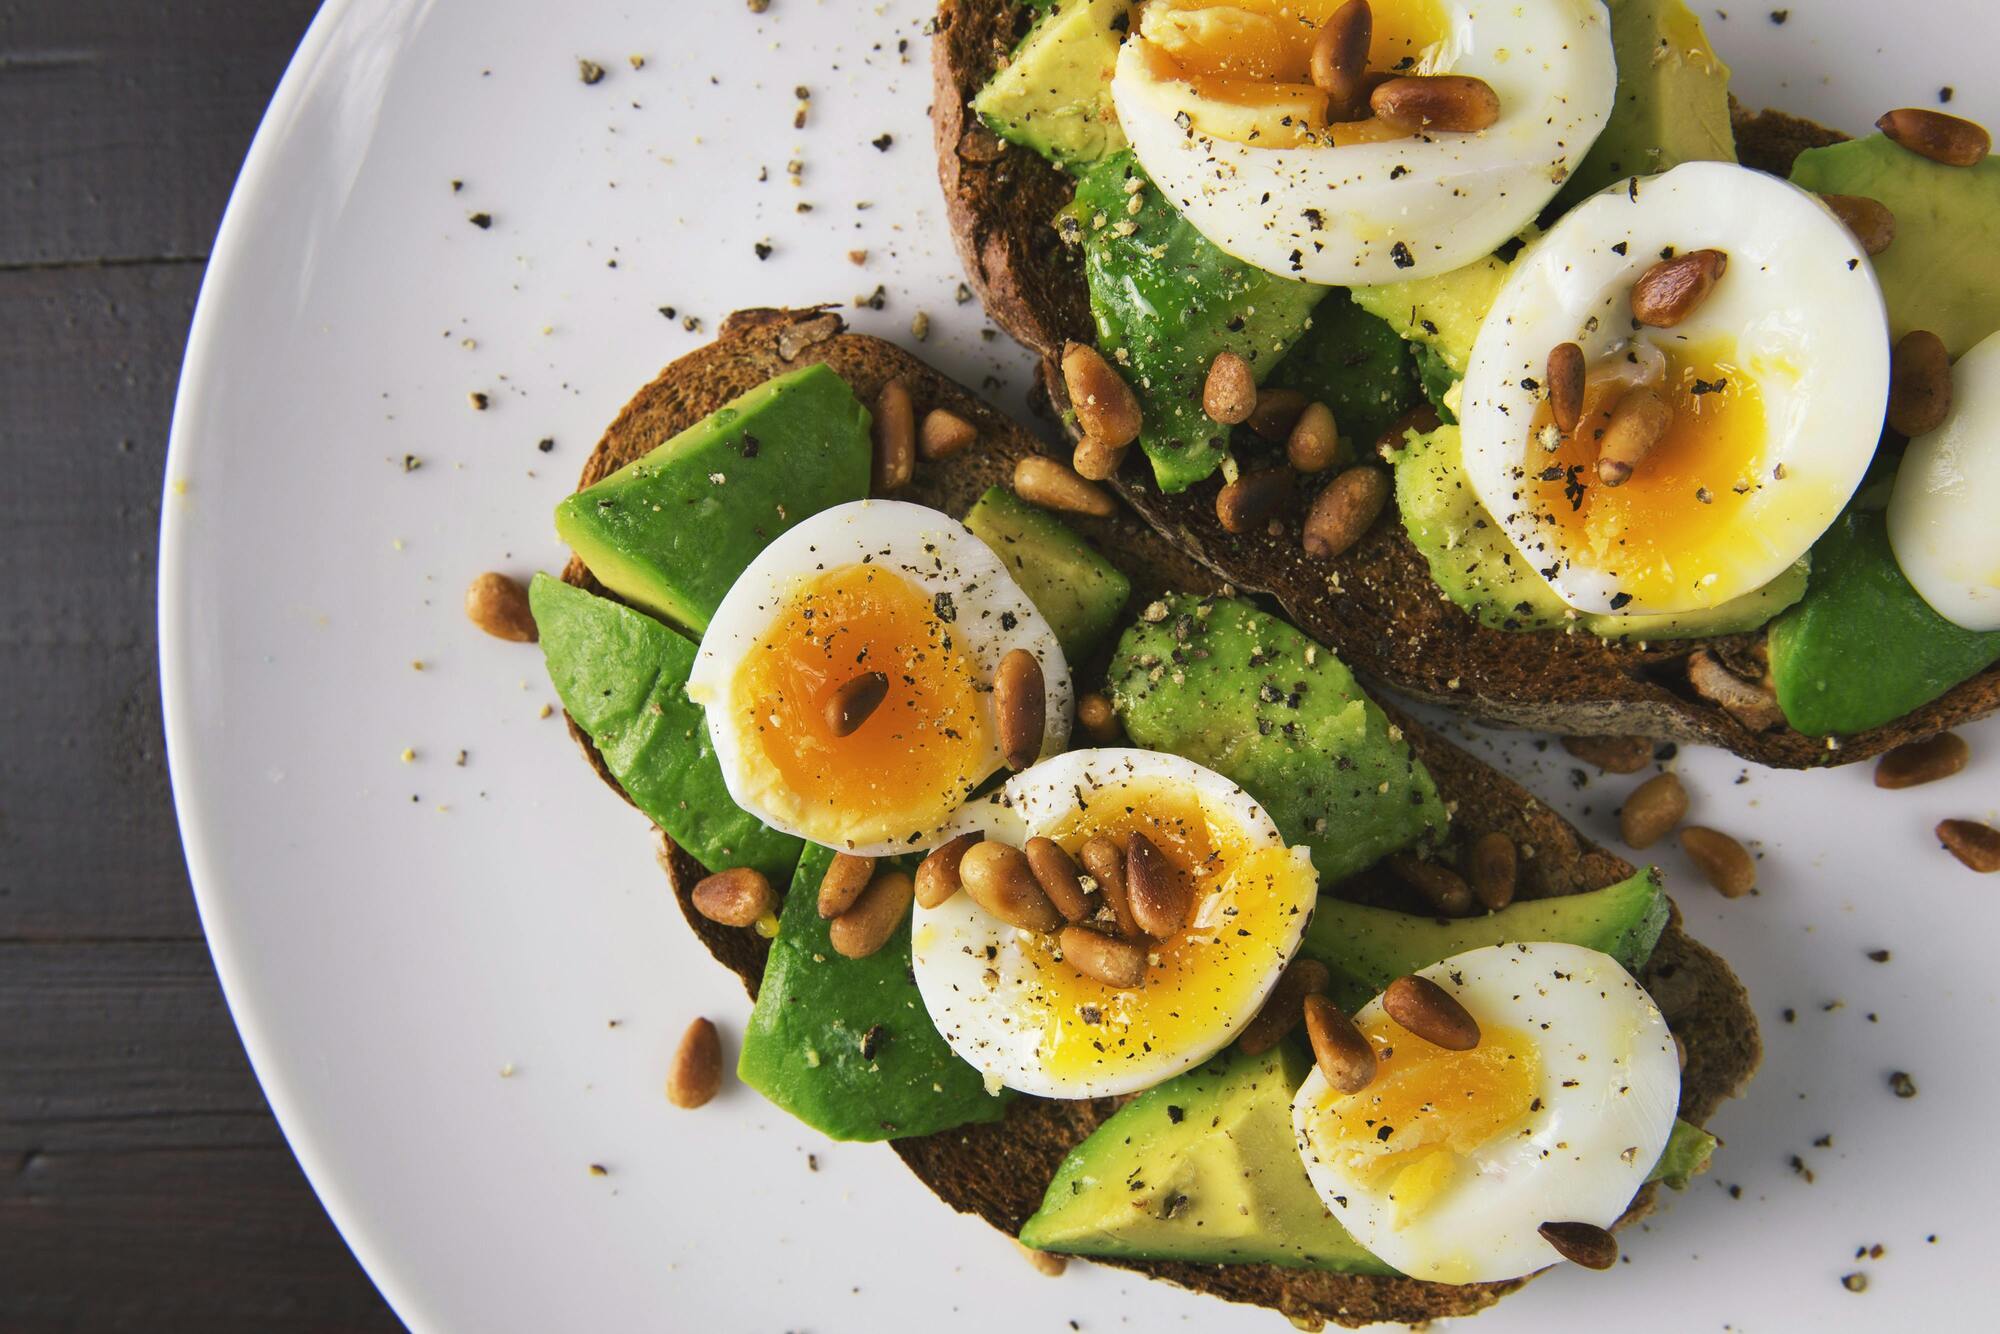 Toast with eggs and avocado